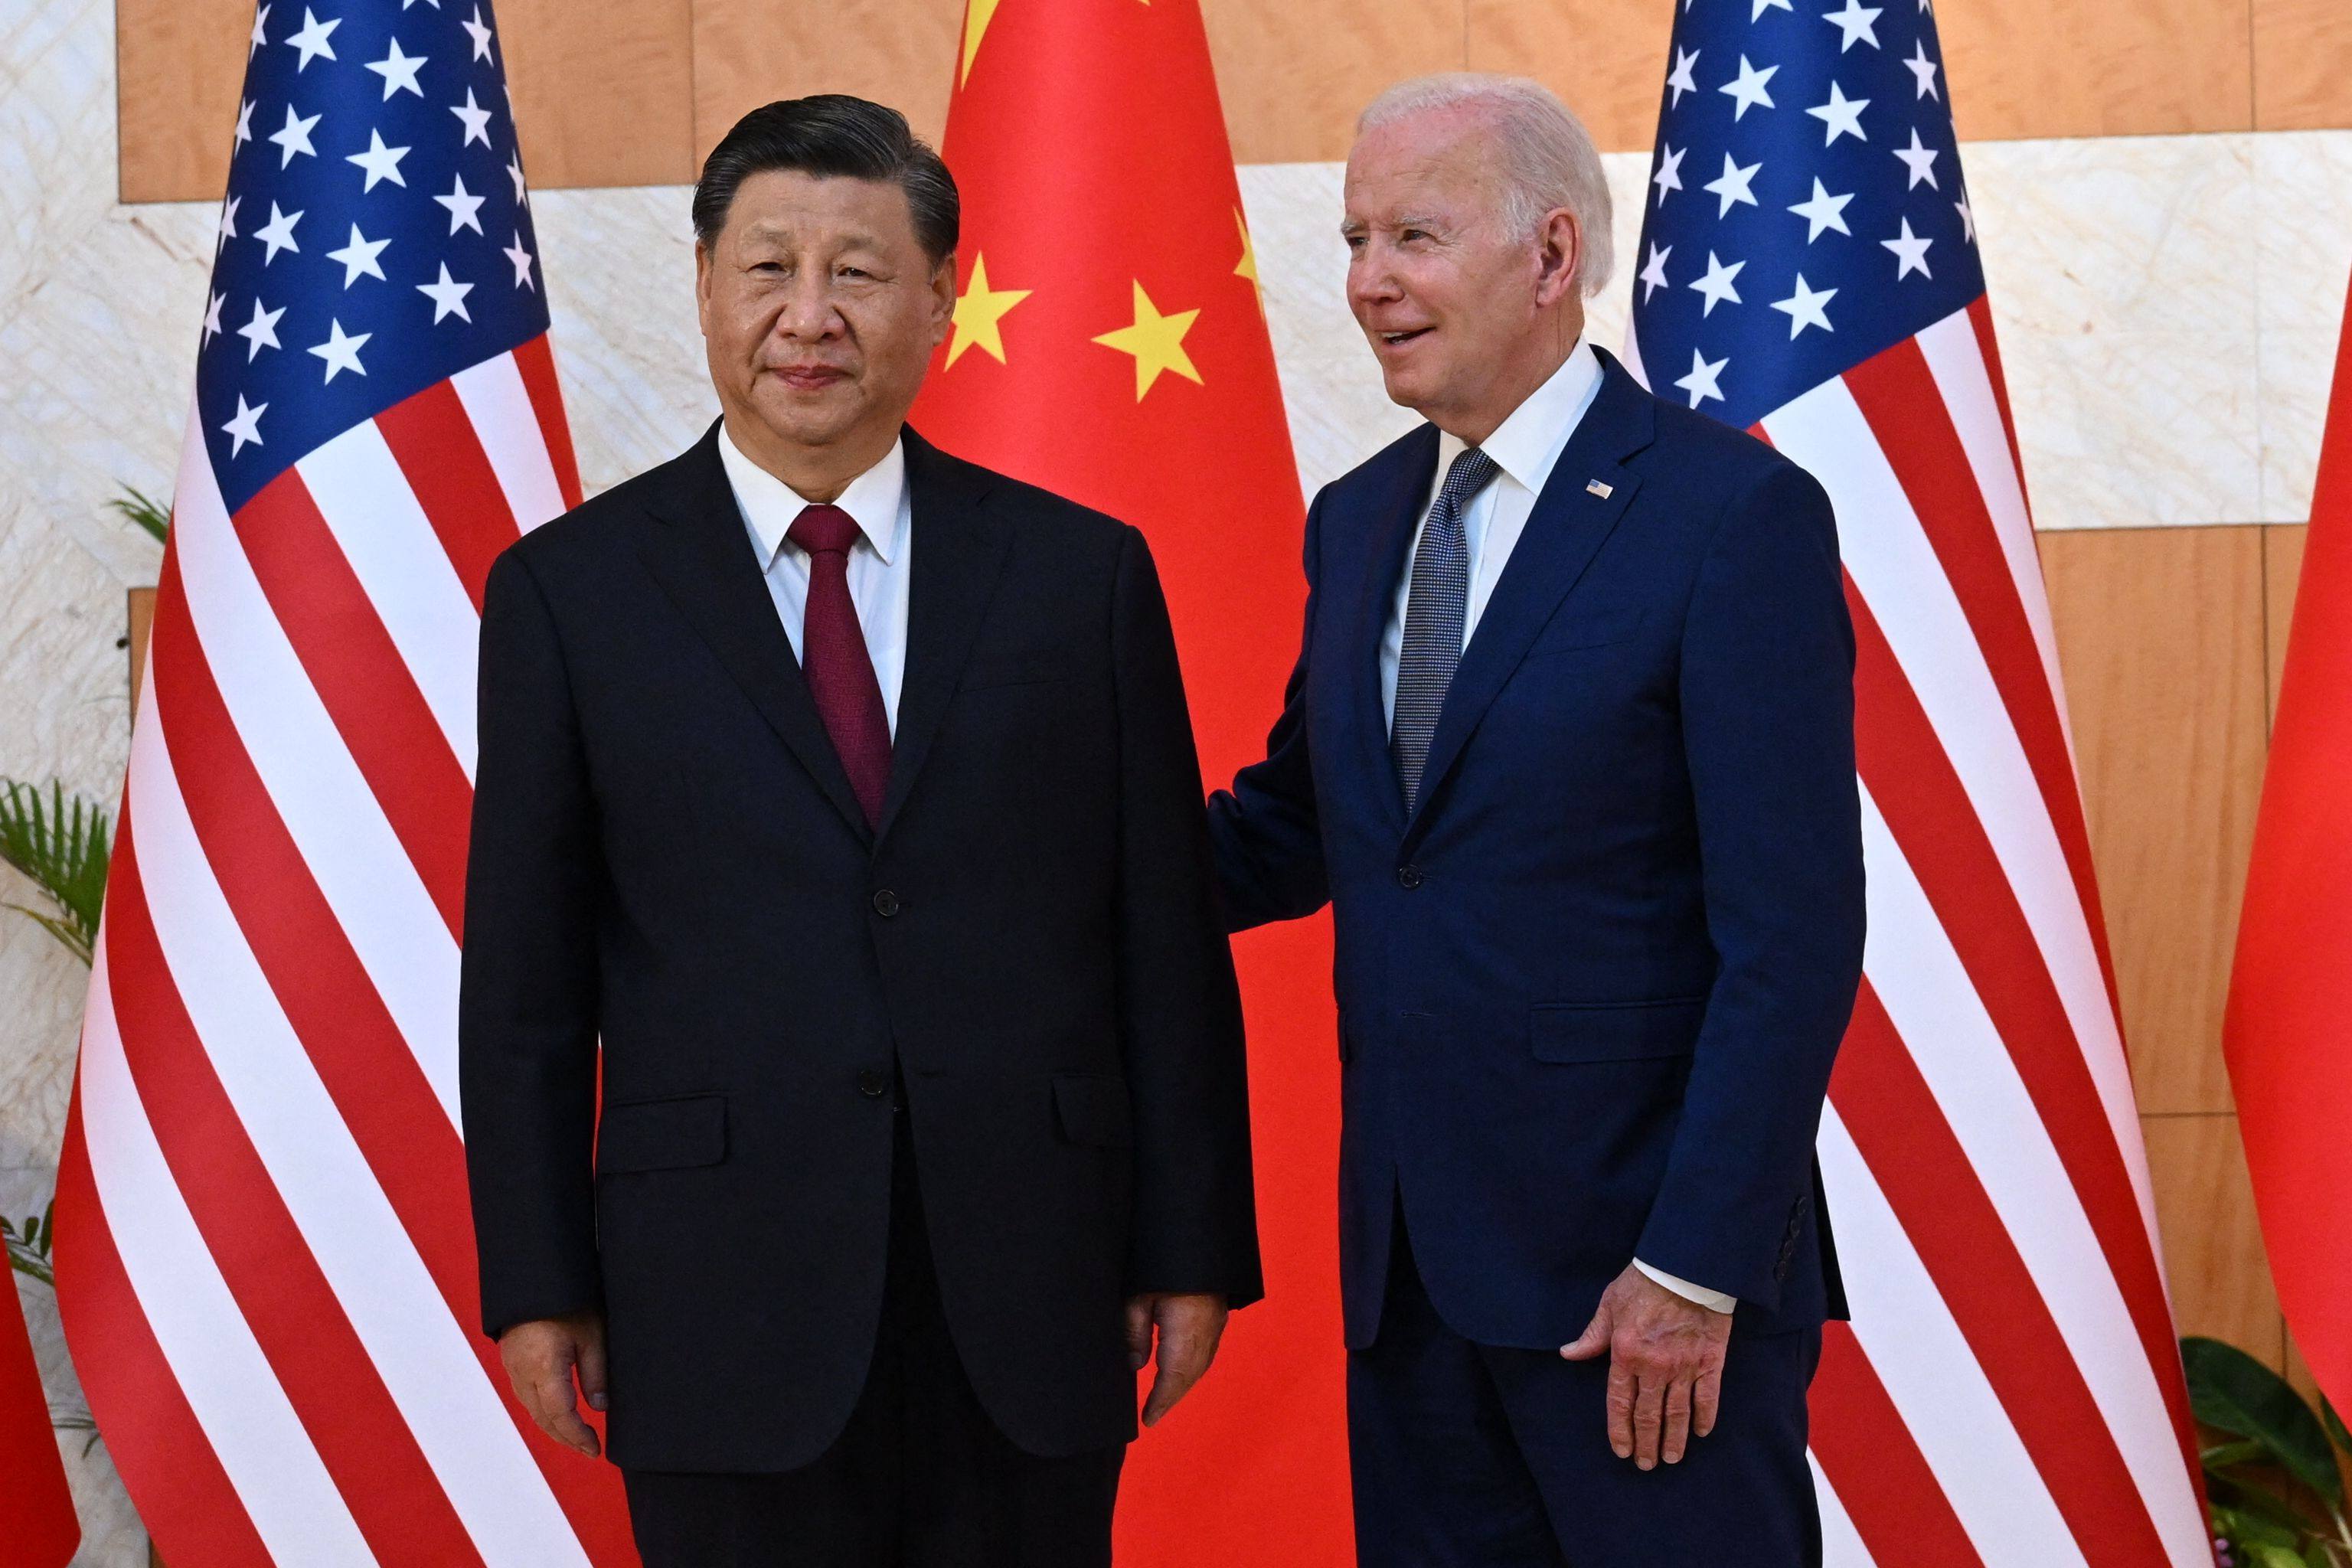 Joe Biden and Xi Jinping ahead of their meeting on the margins of the G20 Summit in  Bali on November 14. Photo: AFP